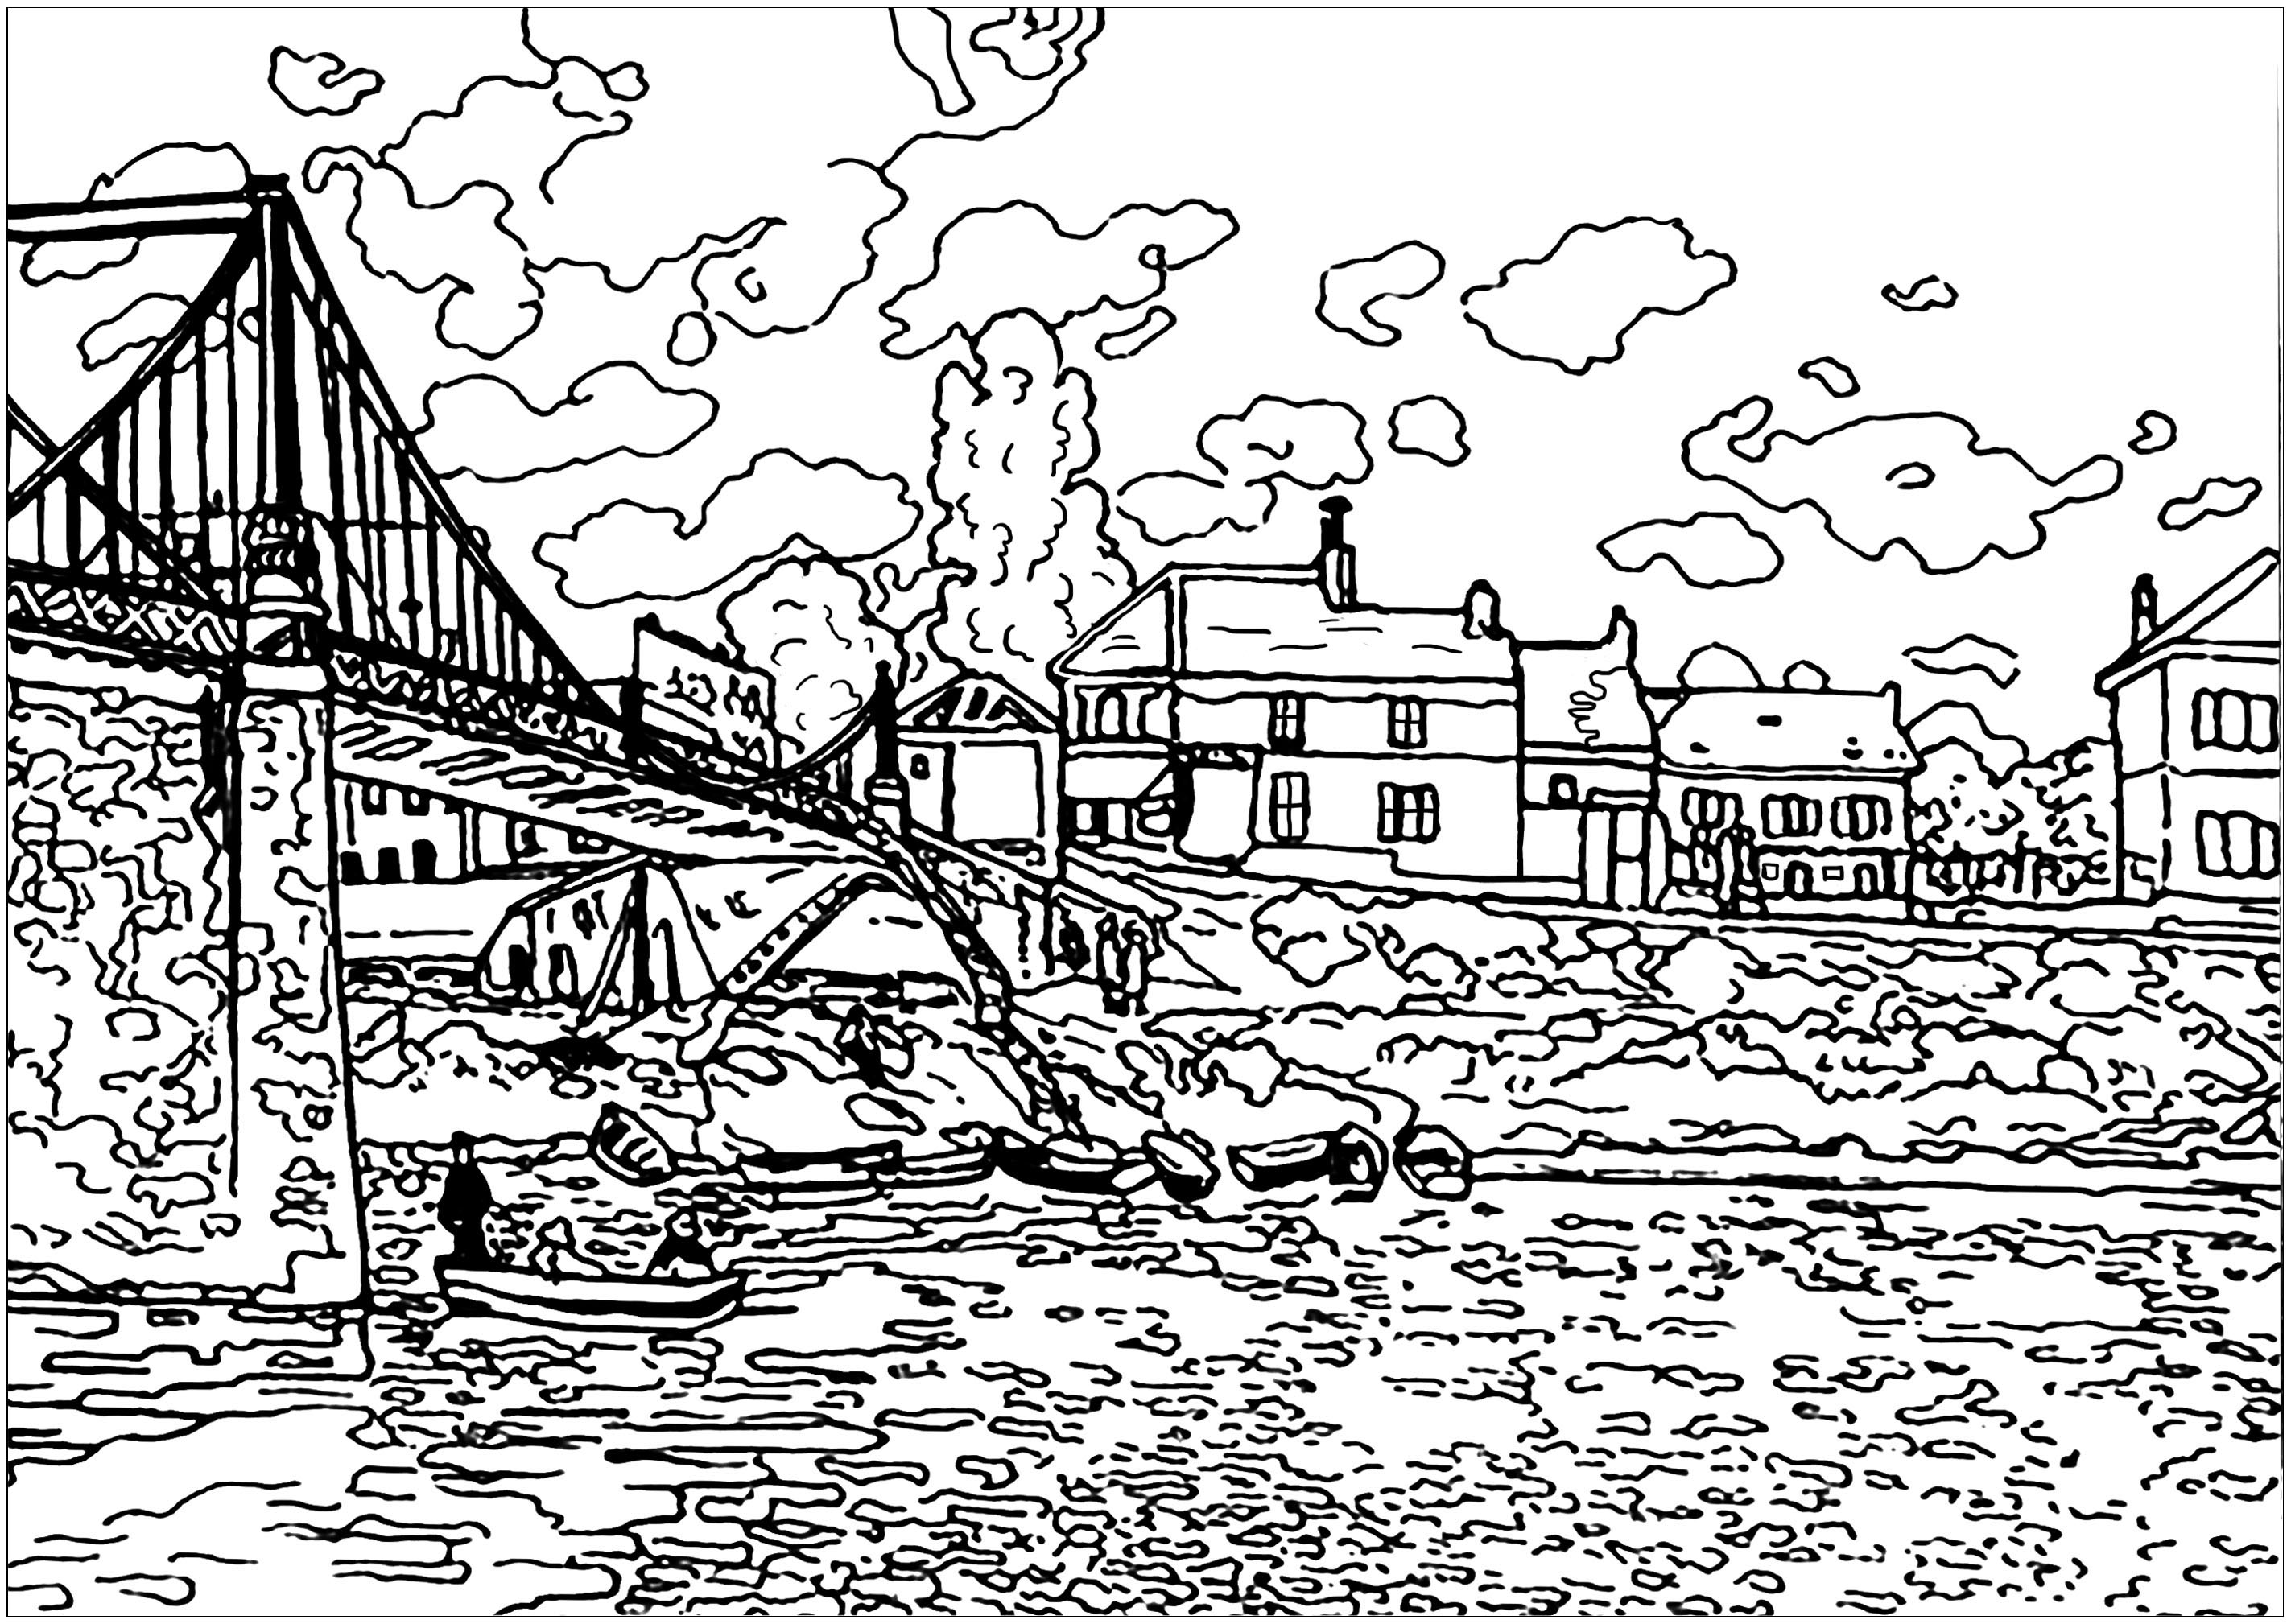 Coloring page created from a painting by Alfred Sisley, famous French Impressionist landscape painter, Artist : Art. Isabelle